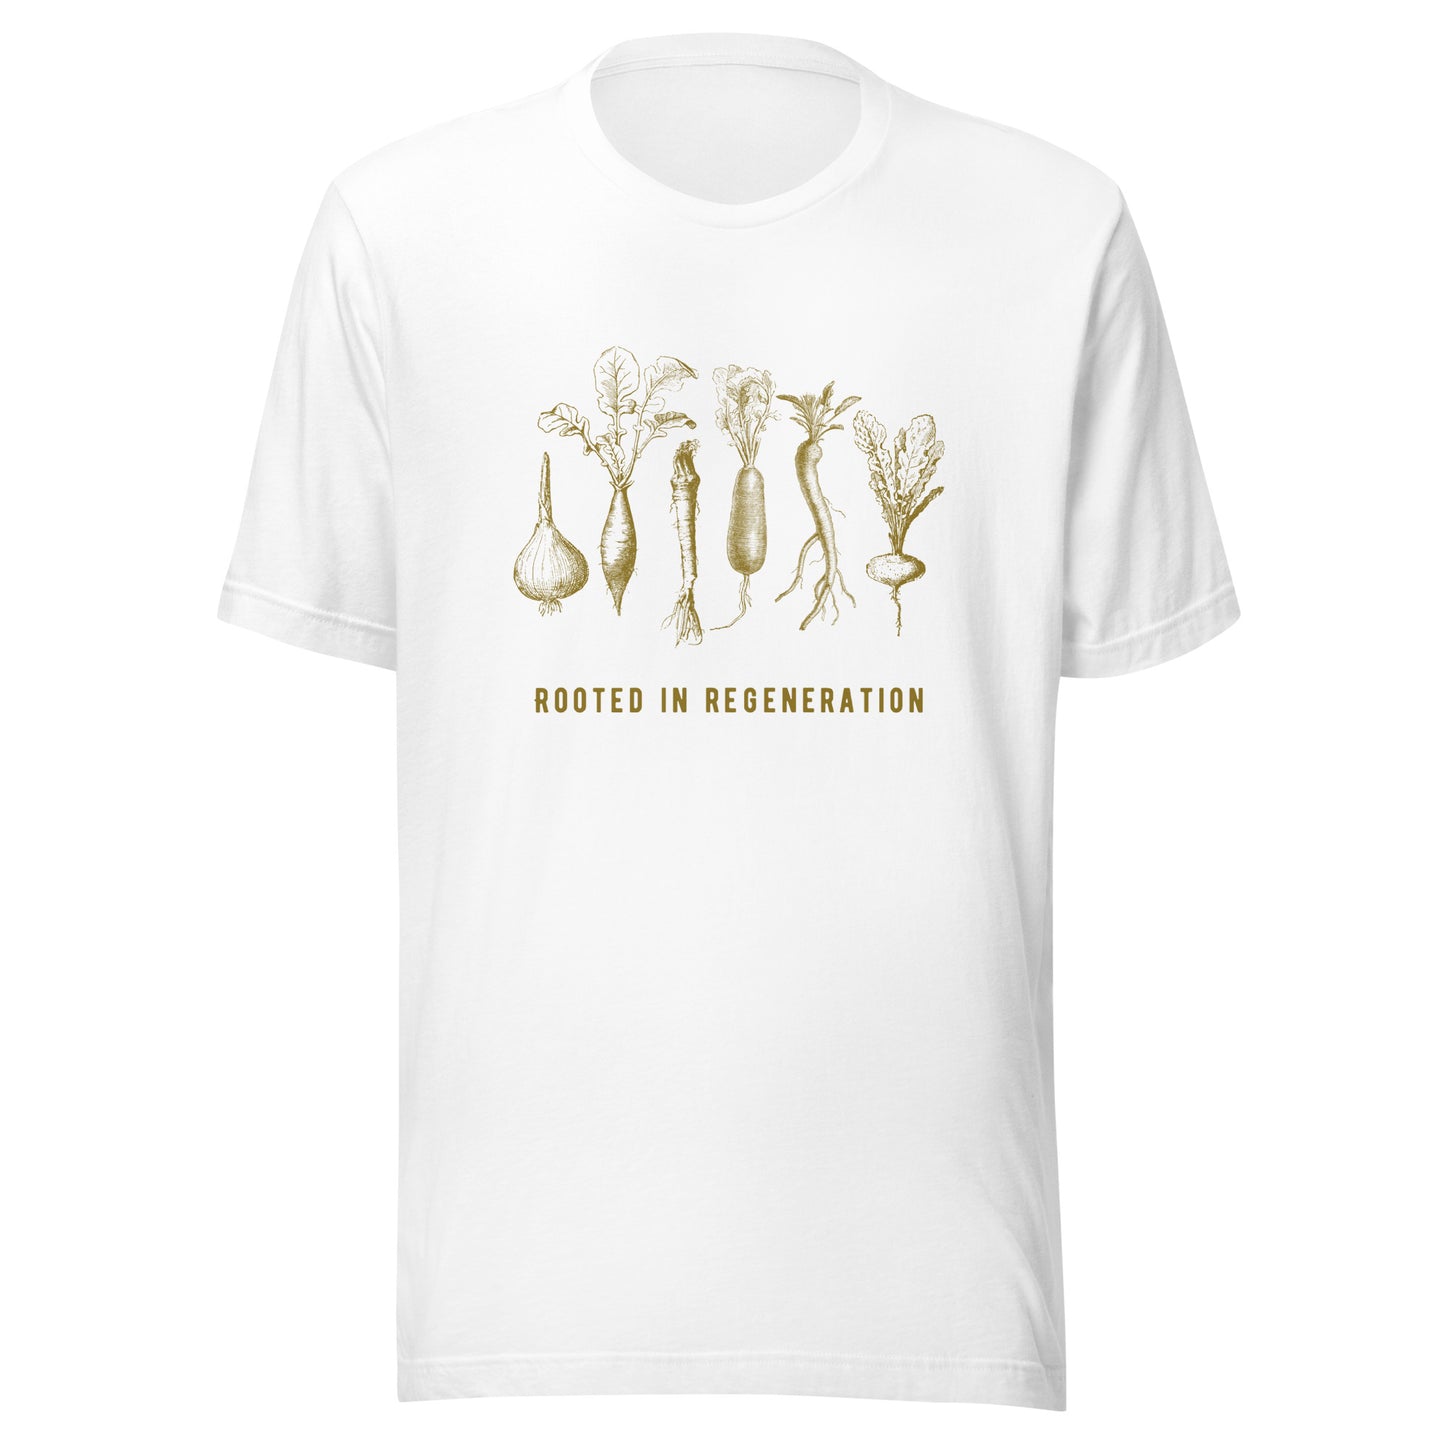 Rooted in Regeneration - Vegetable T-Shirt